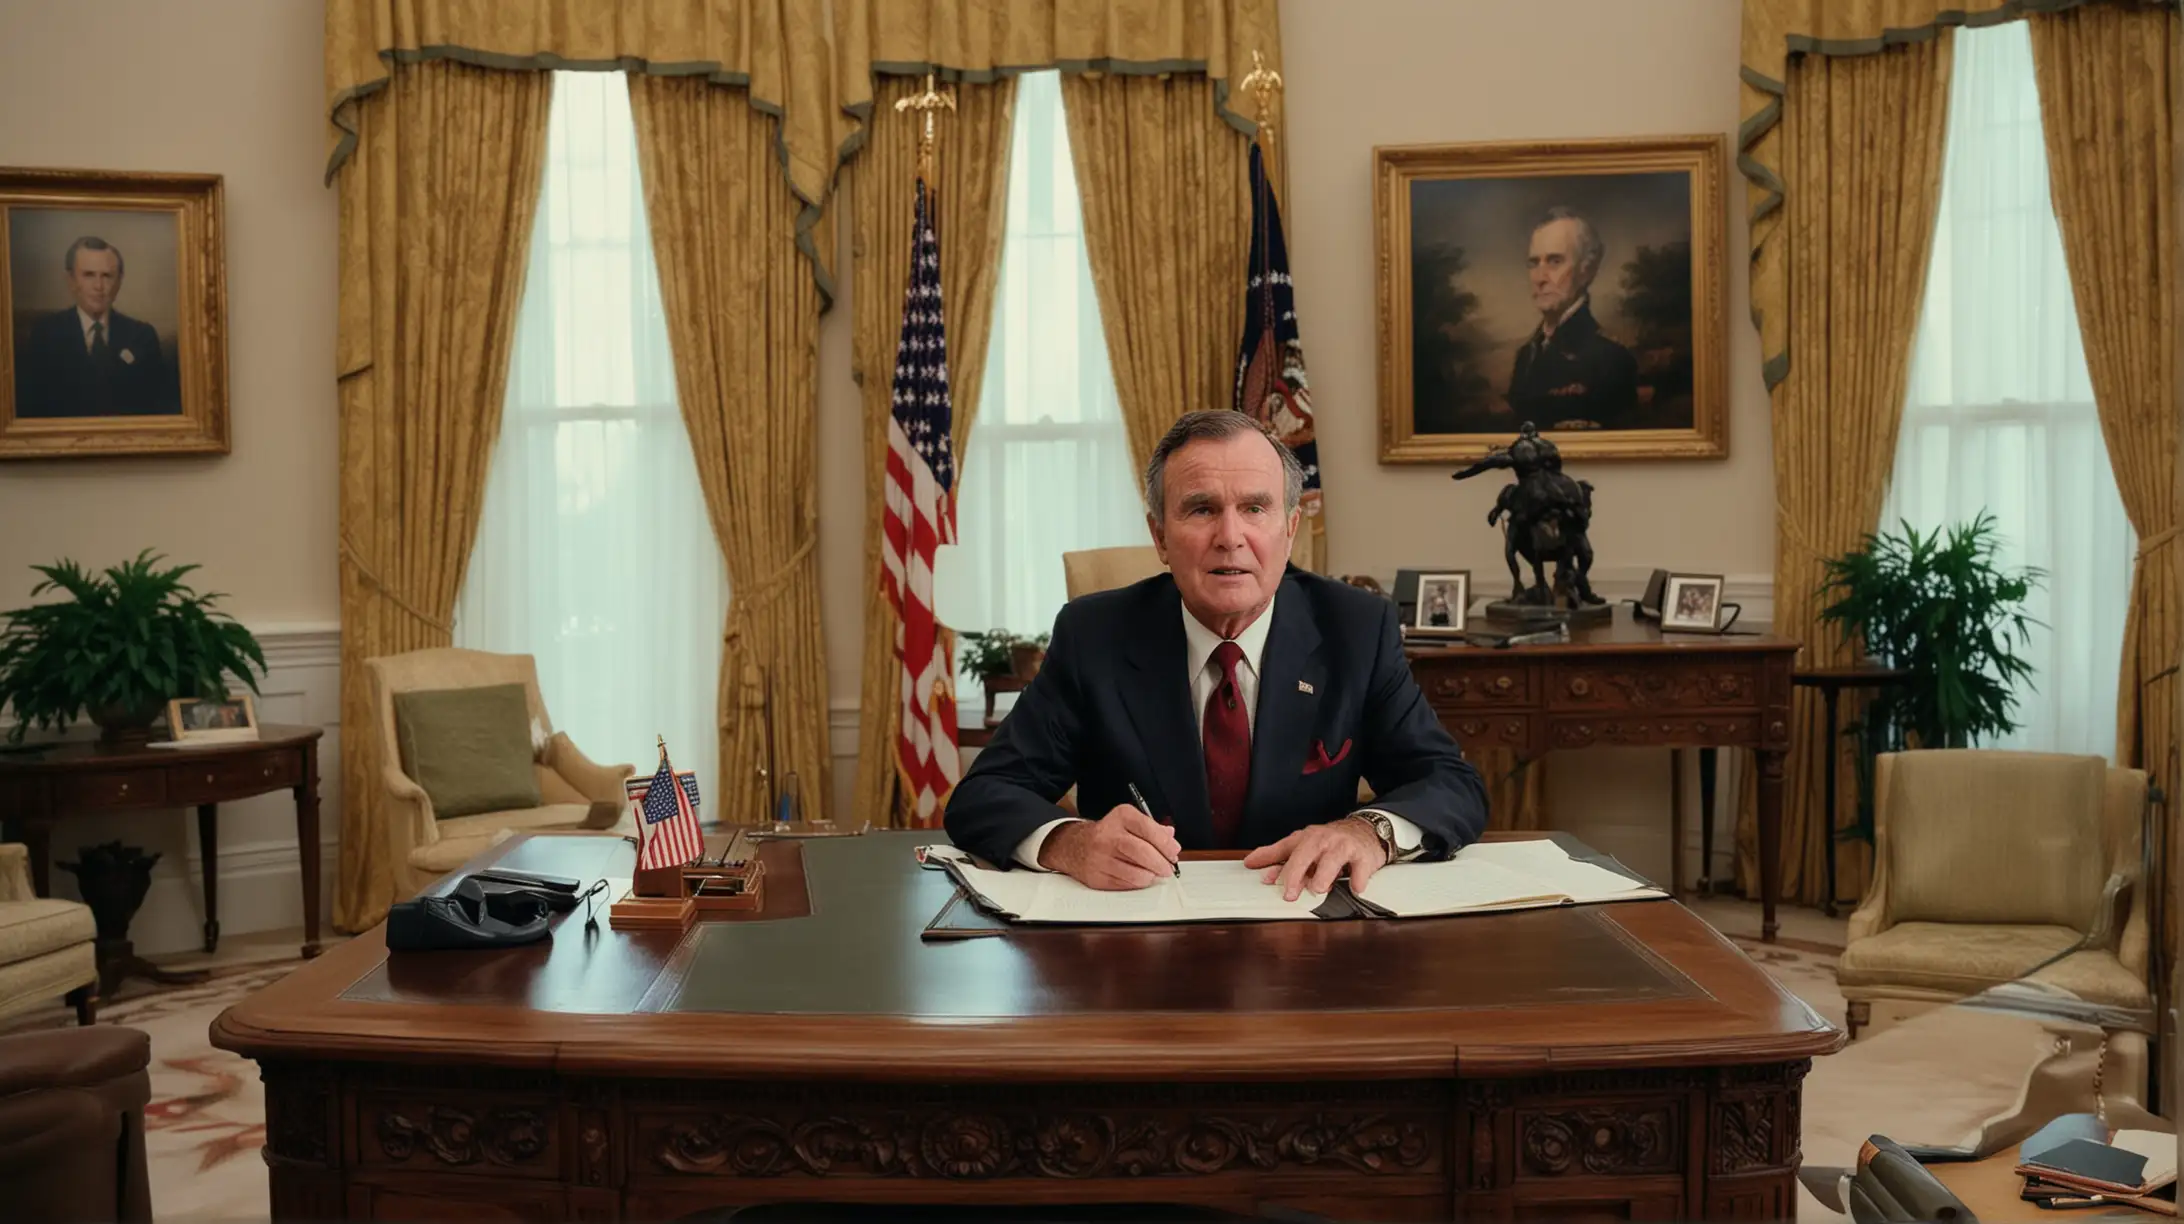 George H W Bush Addressing Nation in Oval Office During Gulf War